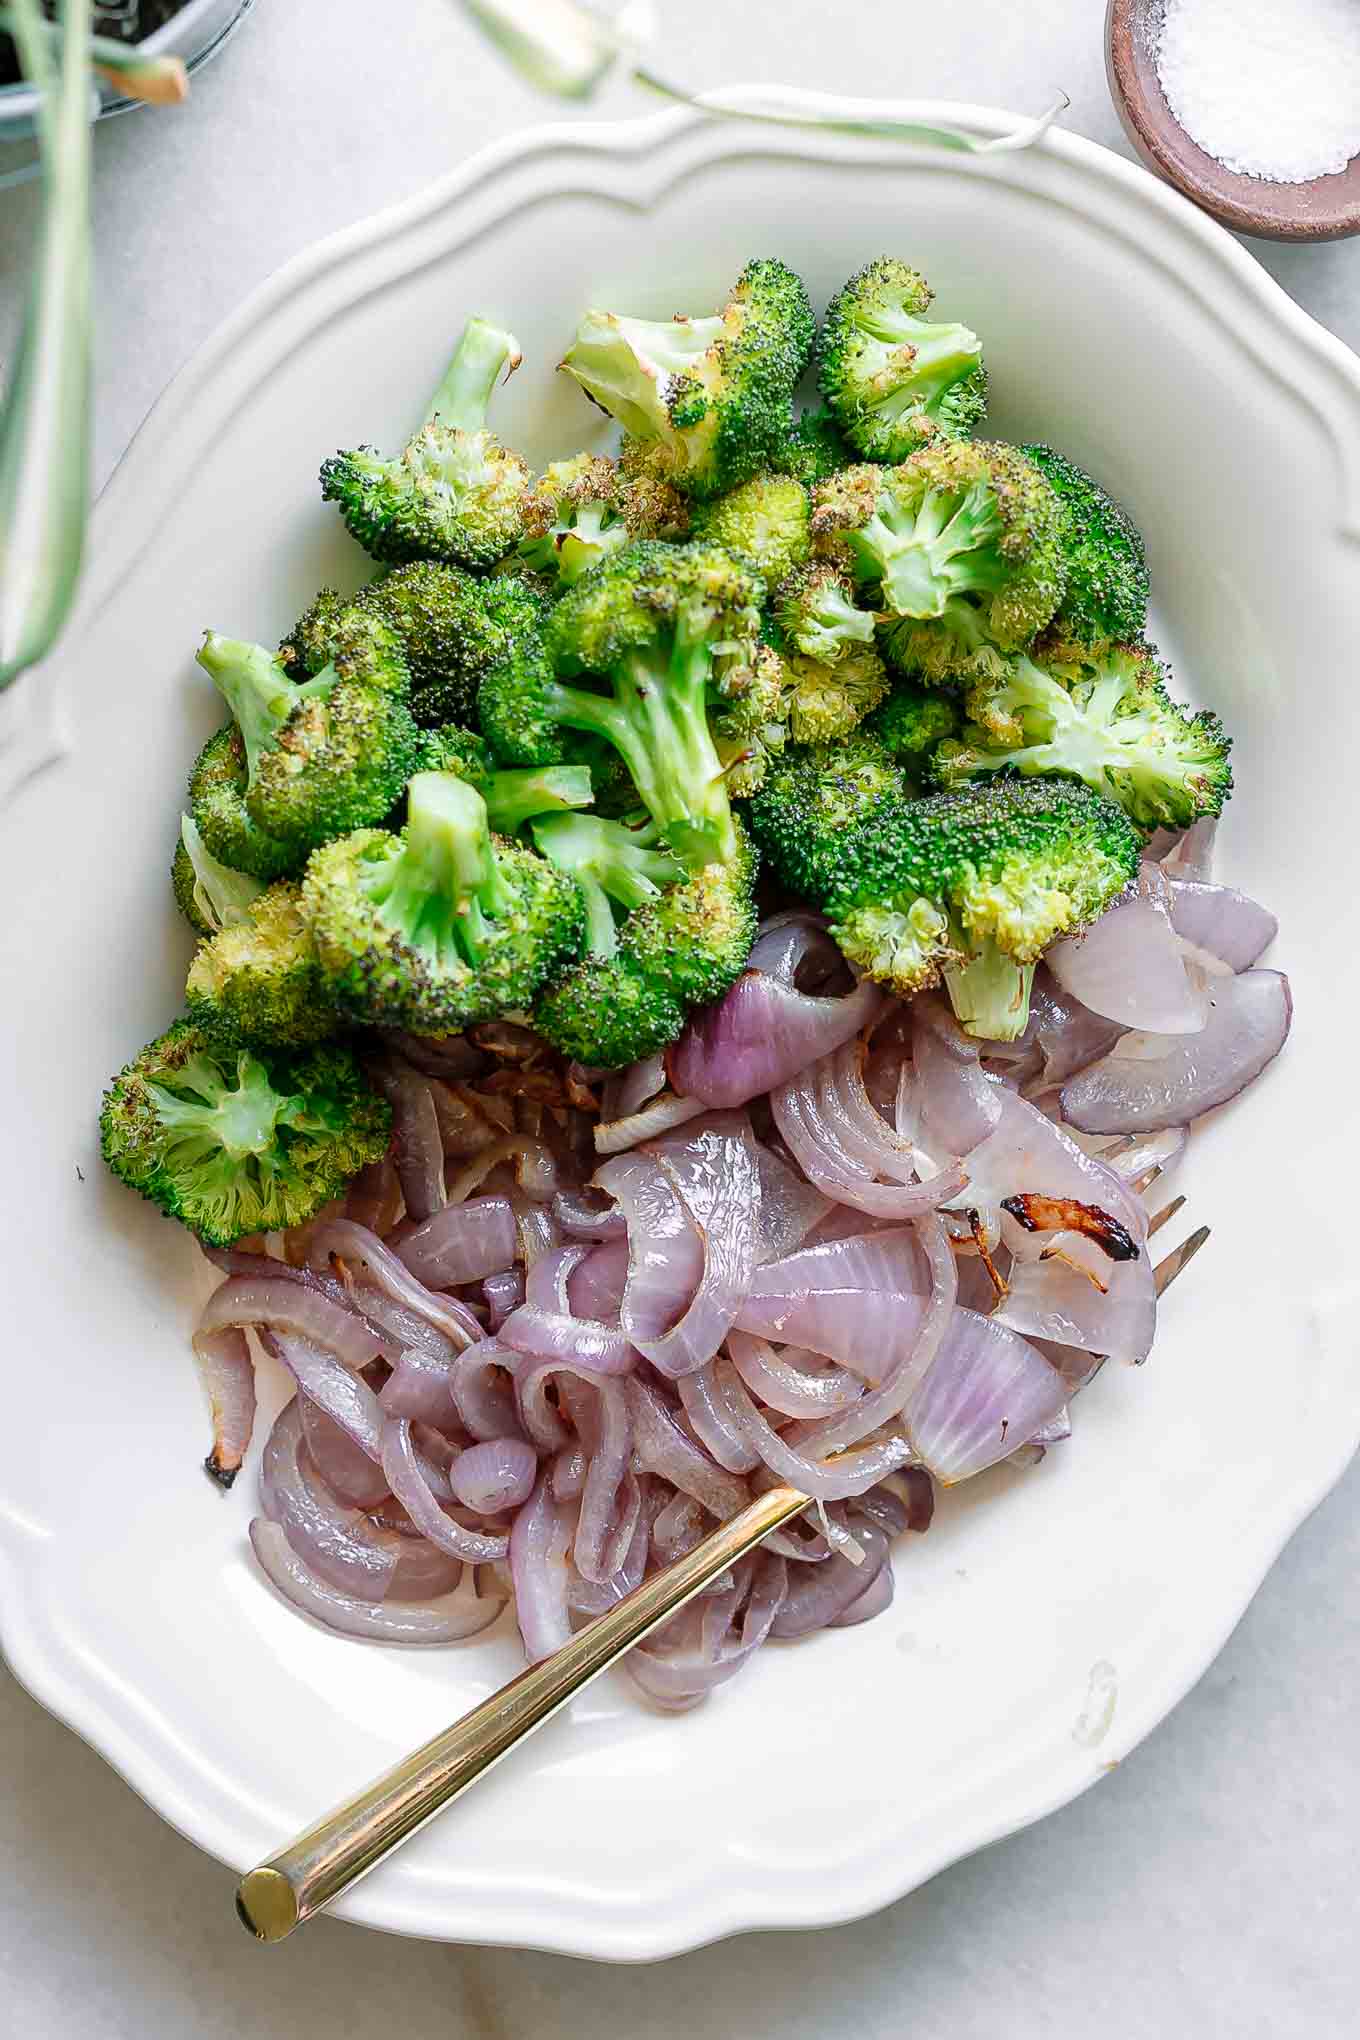 oven baked broccoli and onion on a white plate with a gold fork